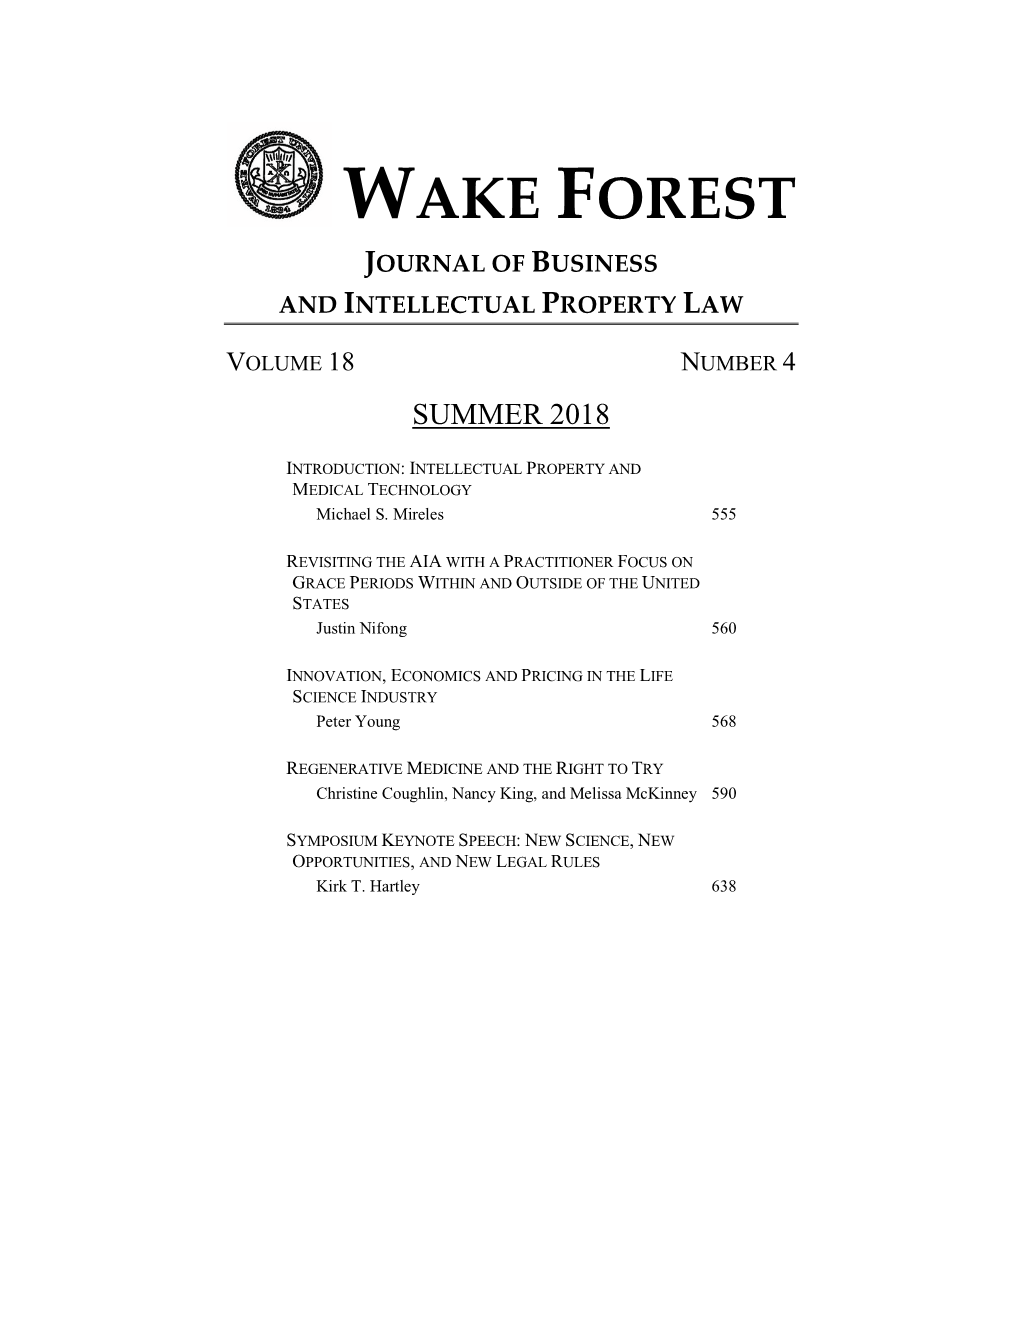 Wake Forest Journal of Business and Intellectual Property Law